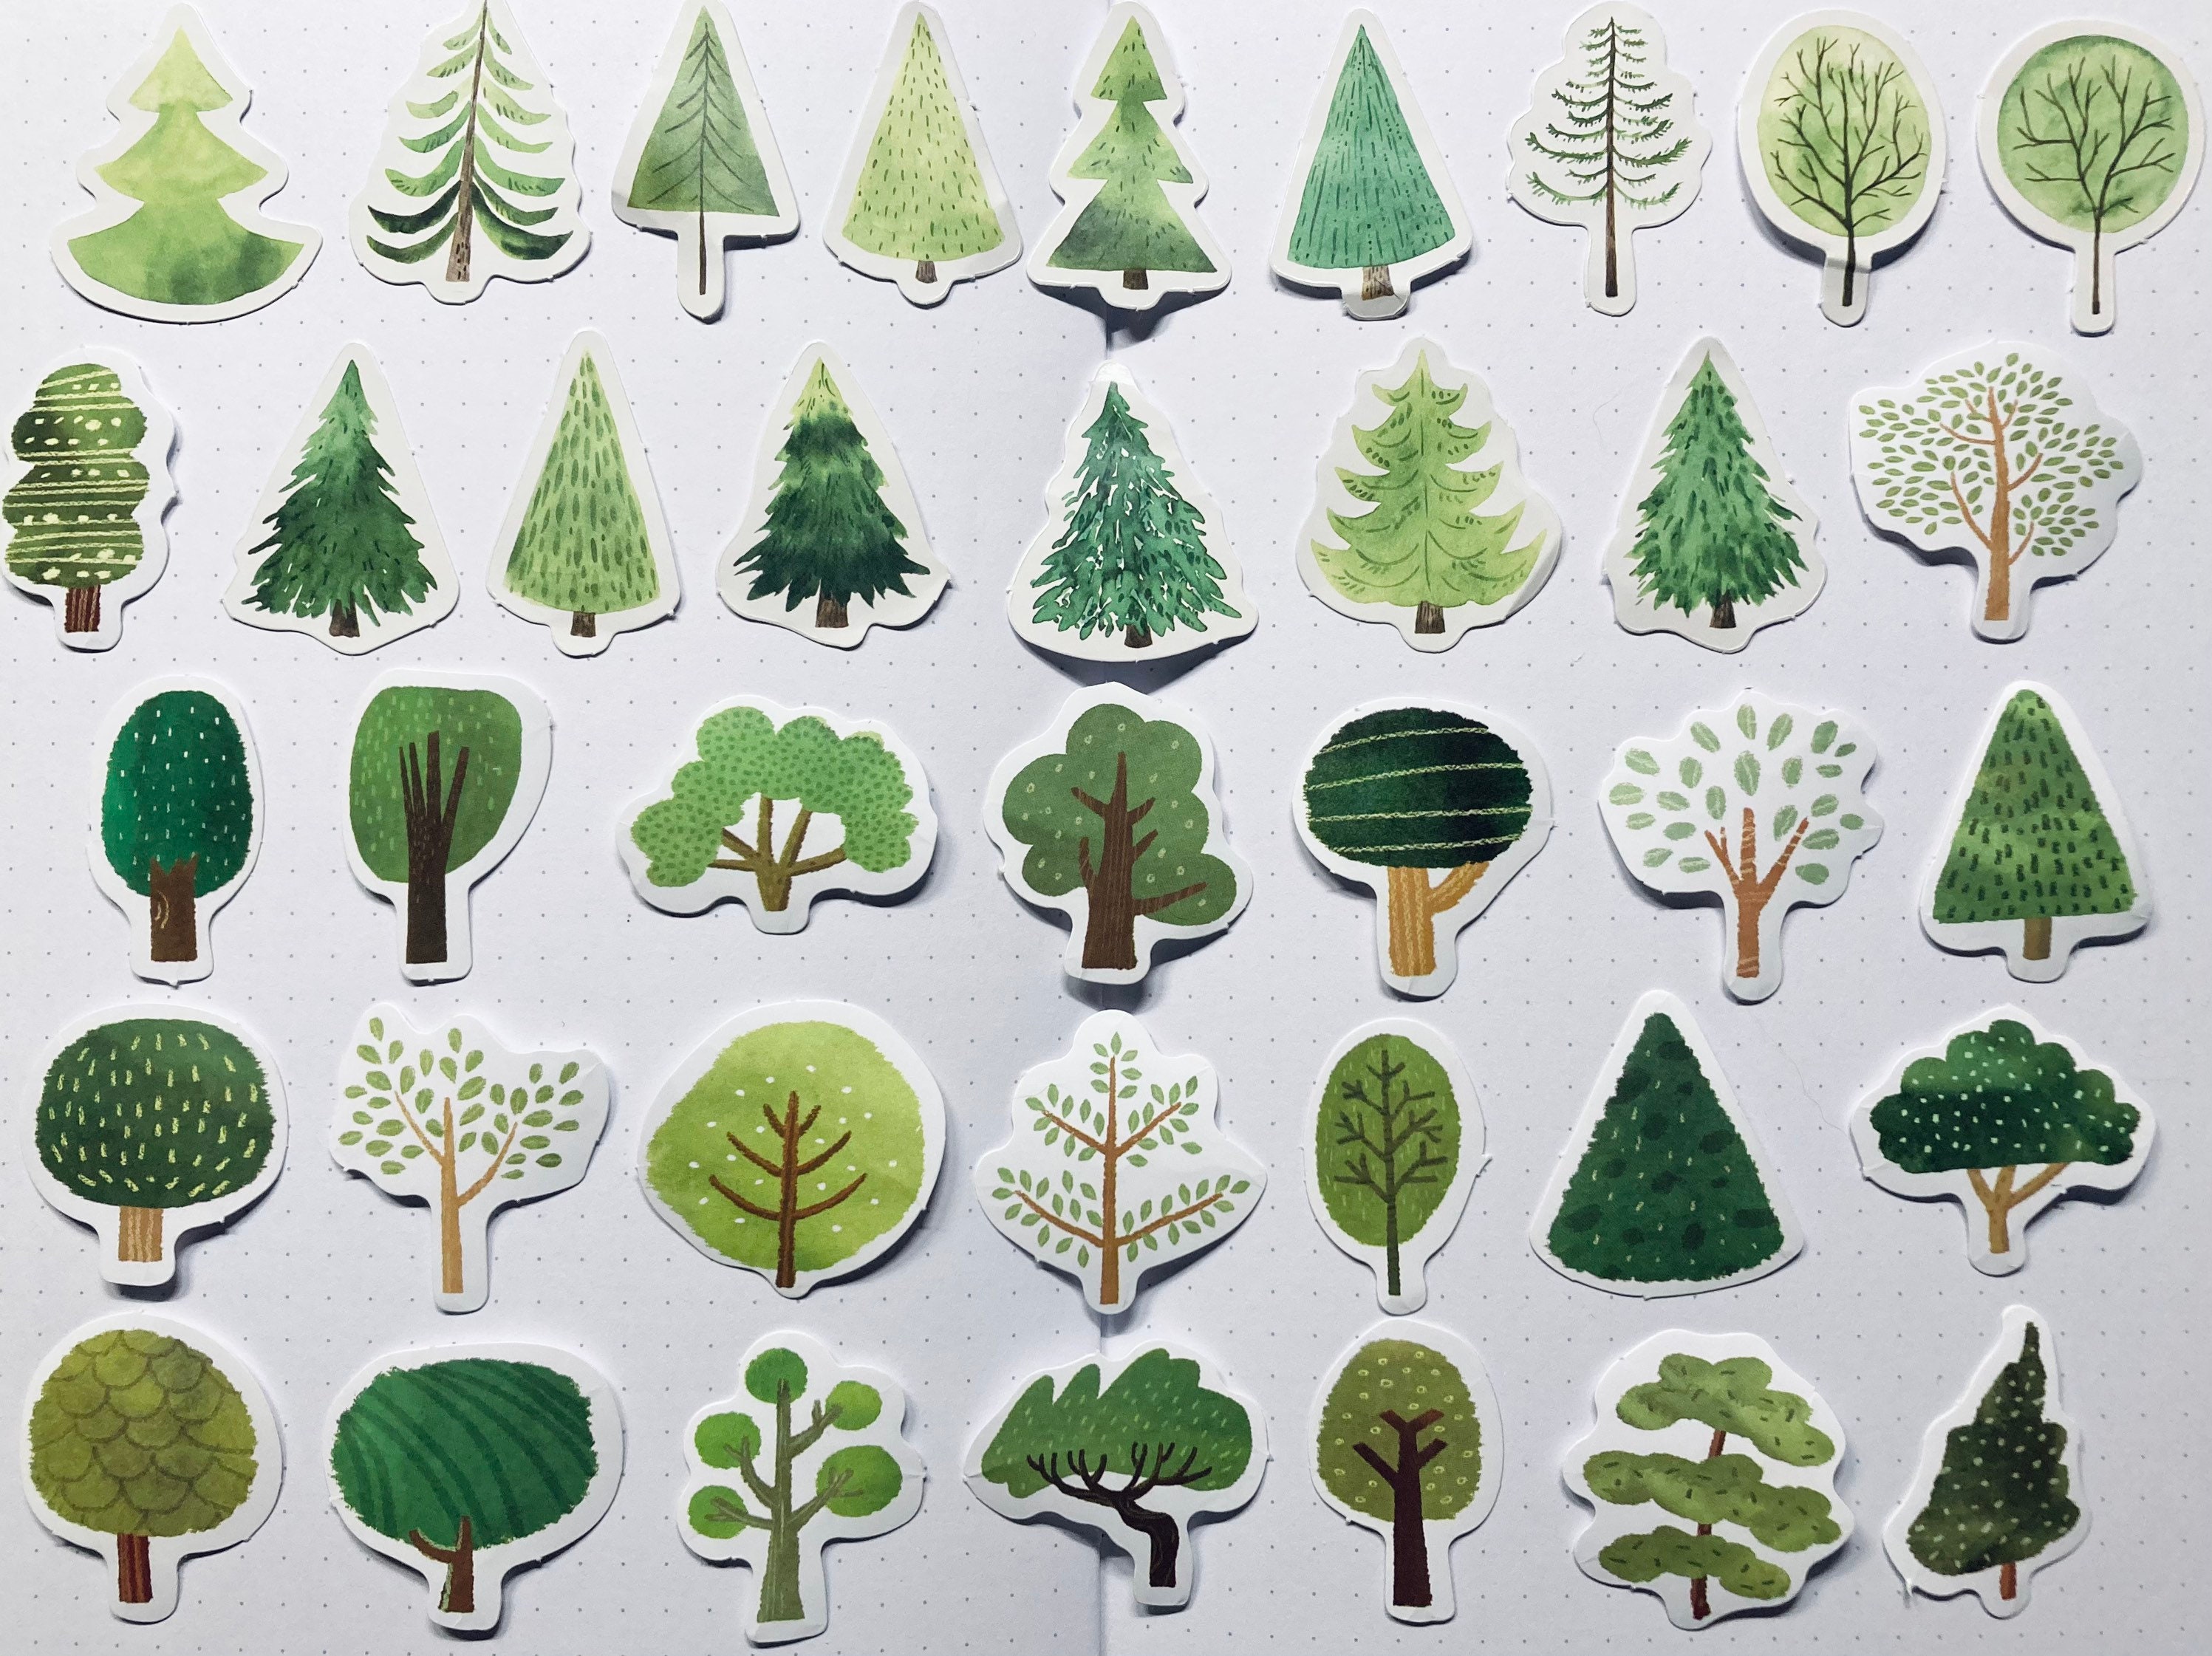 38, 23, or 15 Tree Forest Vacation Camping Outdoor Planner Journal Stickers  